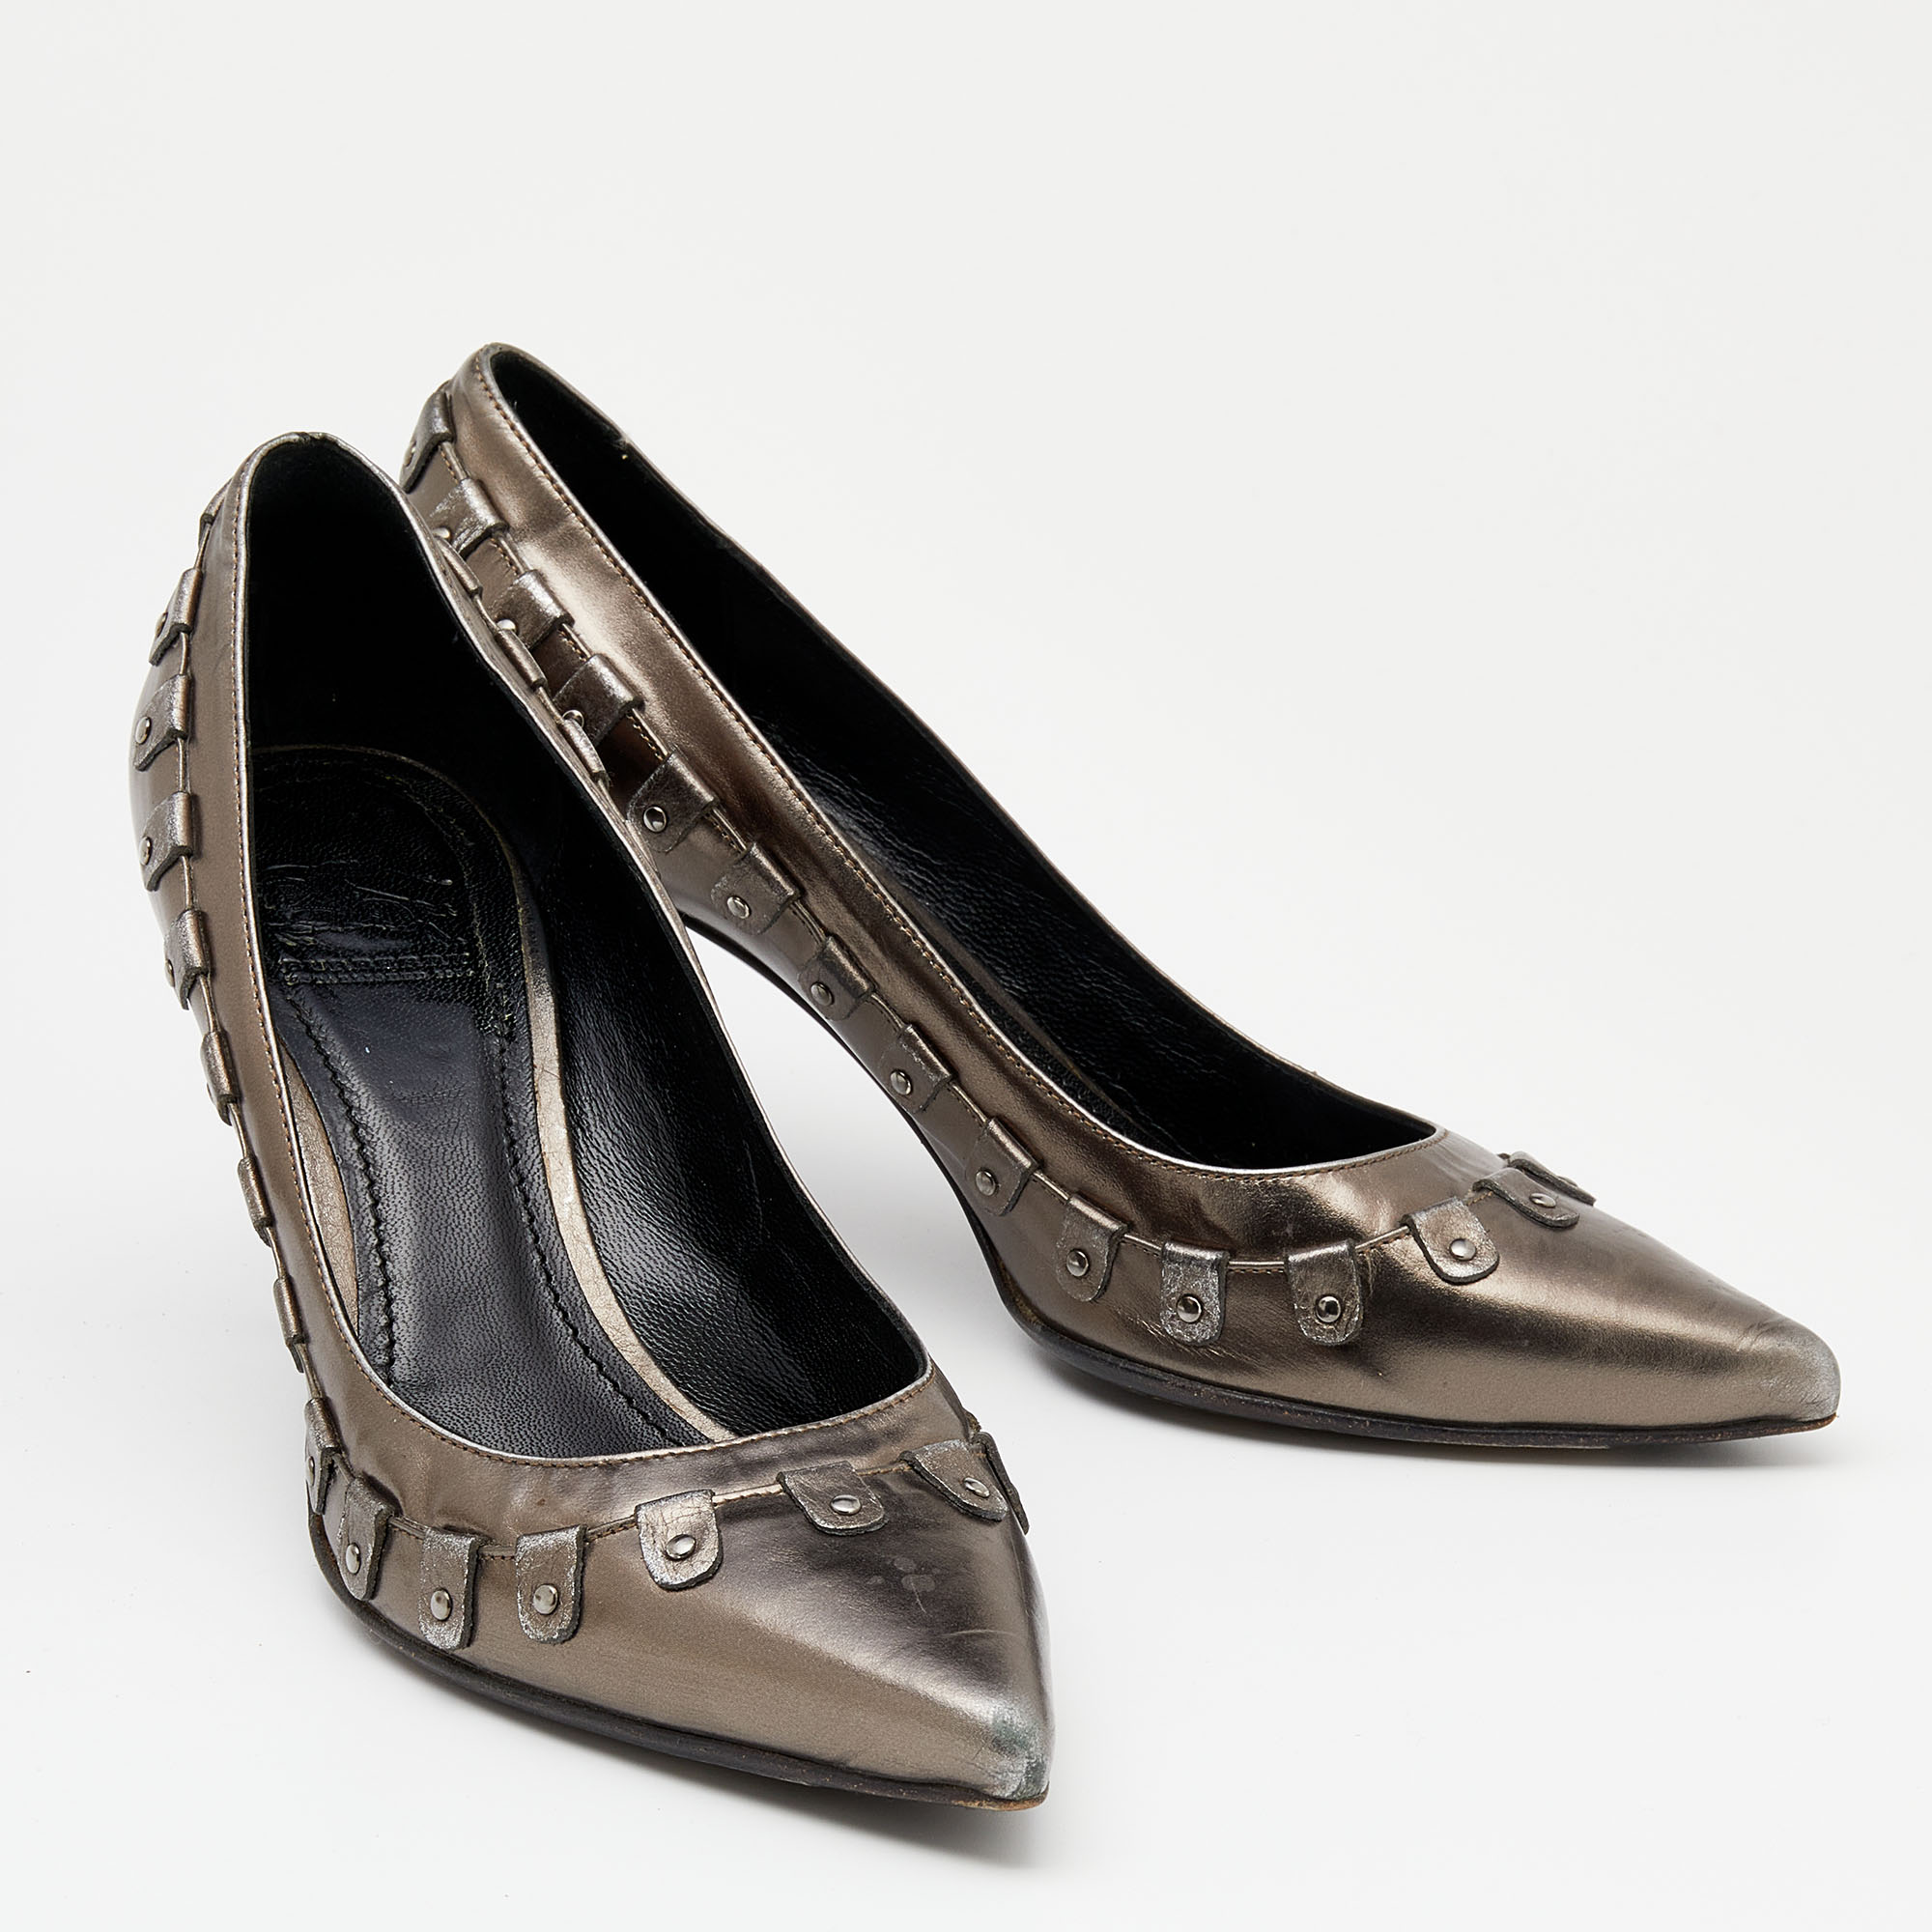 Burberry Metallic Leather Pointed Toe Pumps Size 39